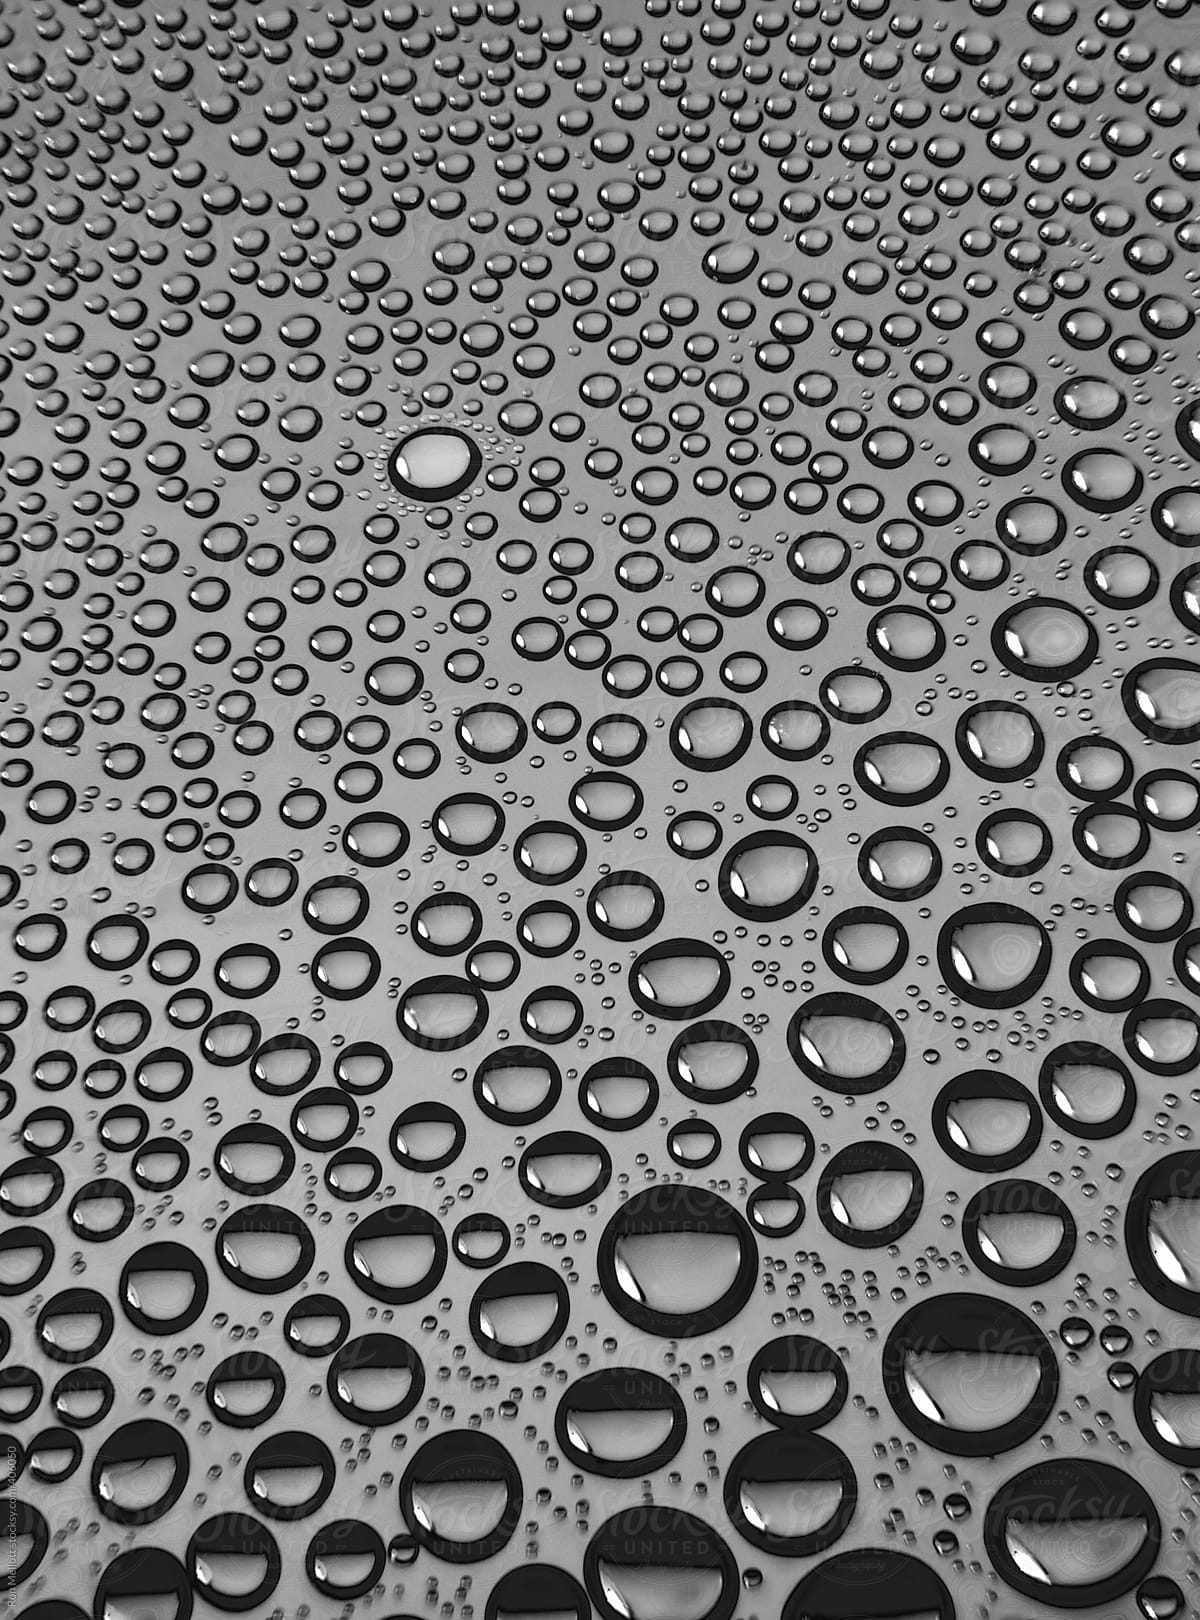 Closeup microphotograph of water condensation inside a plastic bottle